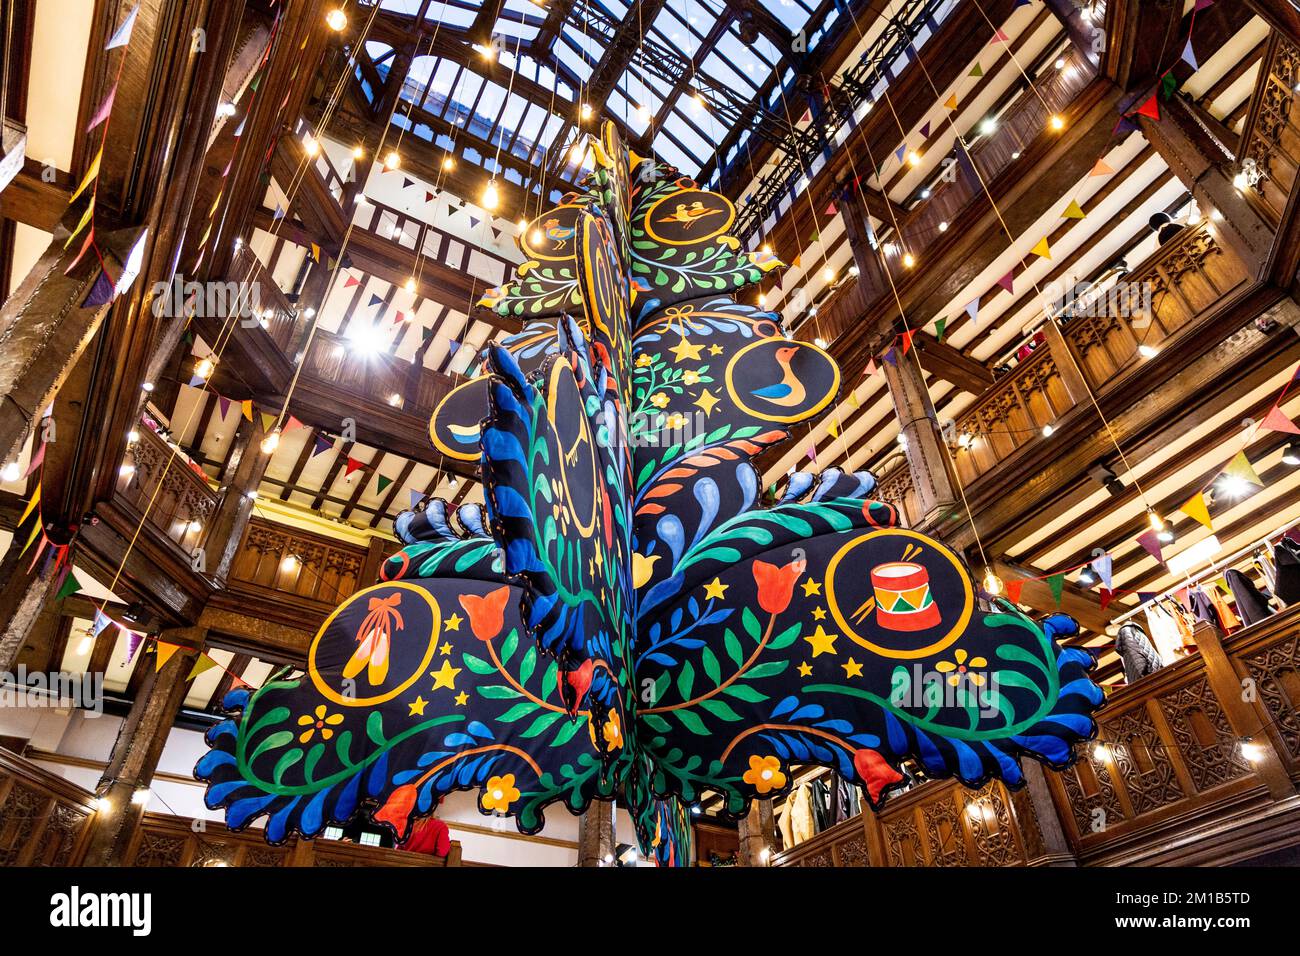 A large Christmas tree suspended from the ceiling at Liberty London, UK Stock Photo